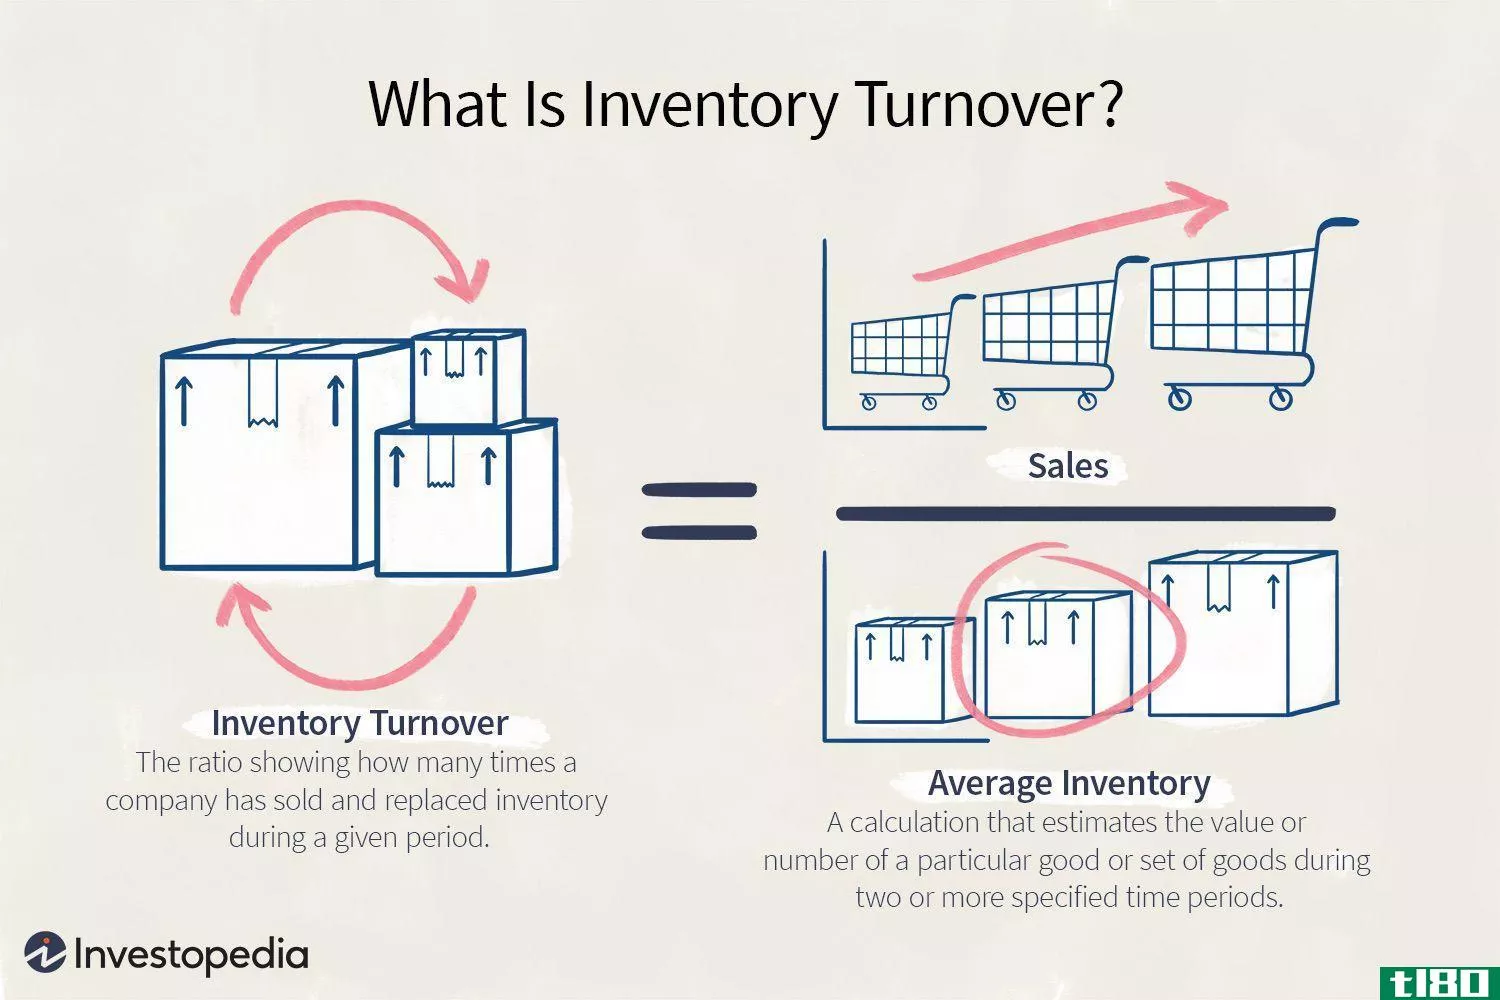 What Is Inventory Turnover